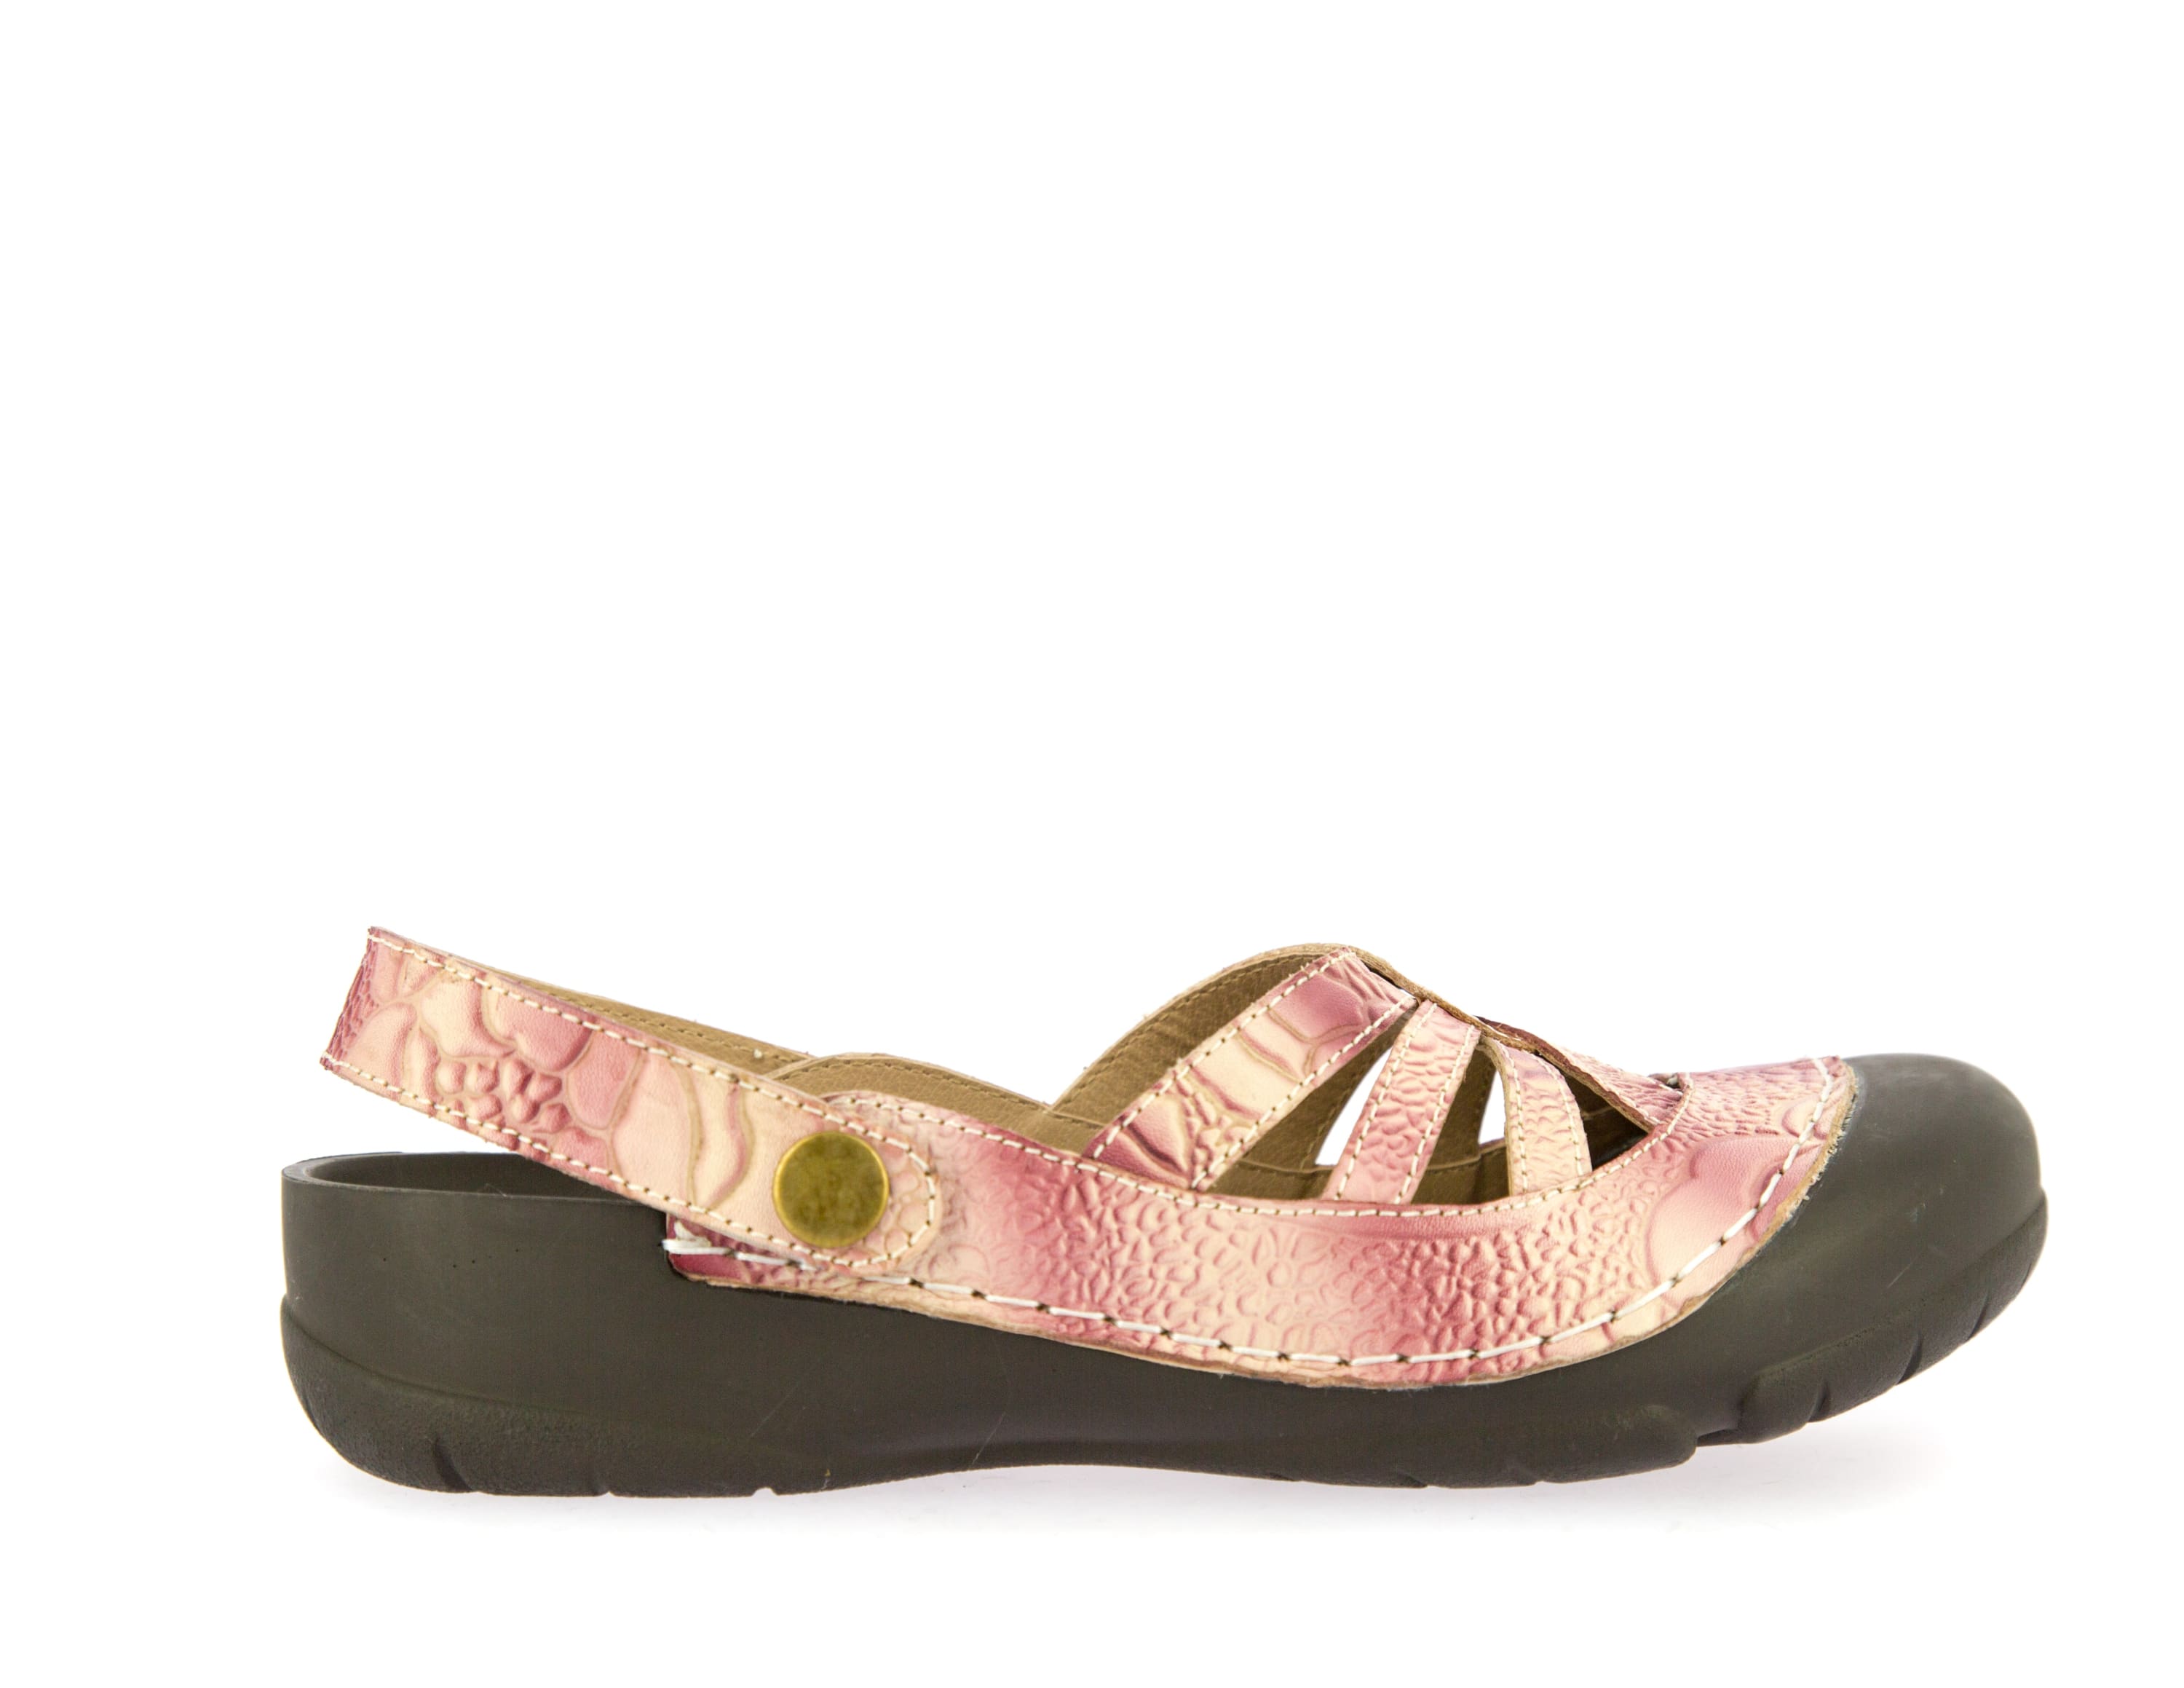 Chaussures BEZIERS 04 - 37 / Beige - Mule